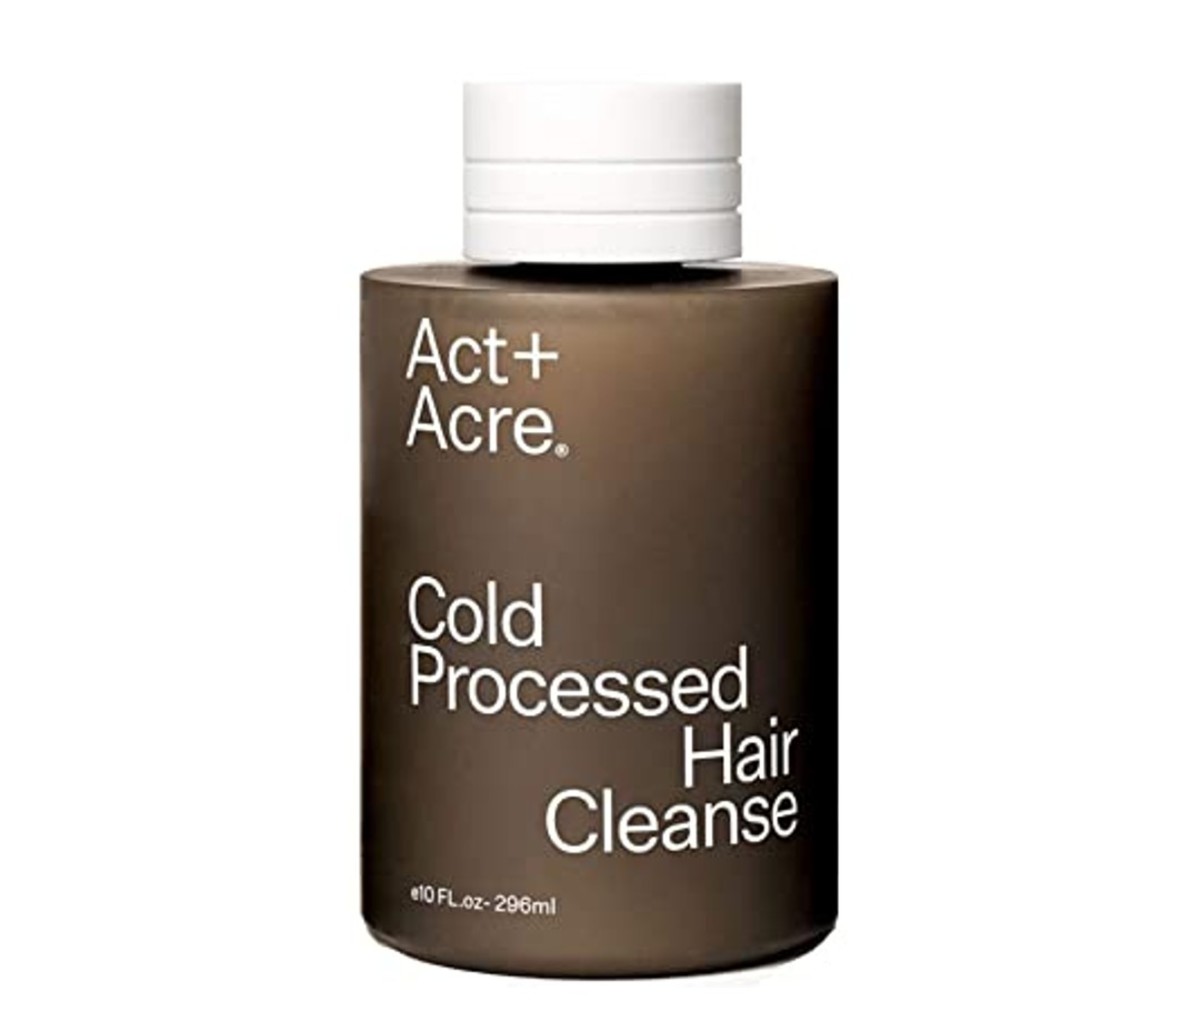 Act+Acre | Cold Processed Hair Conditioner